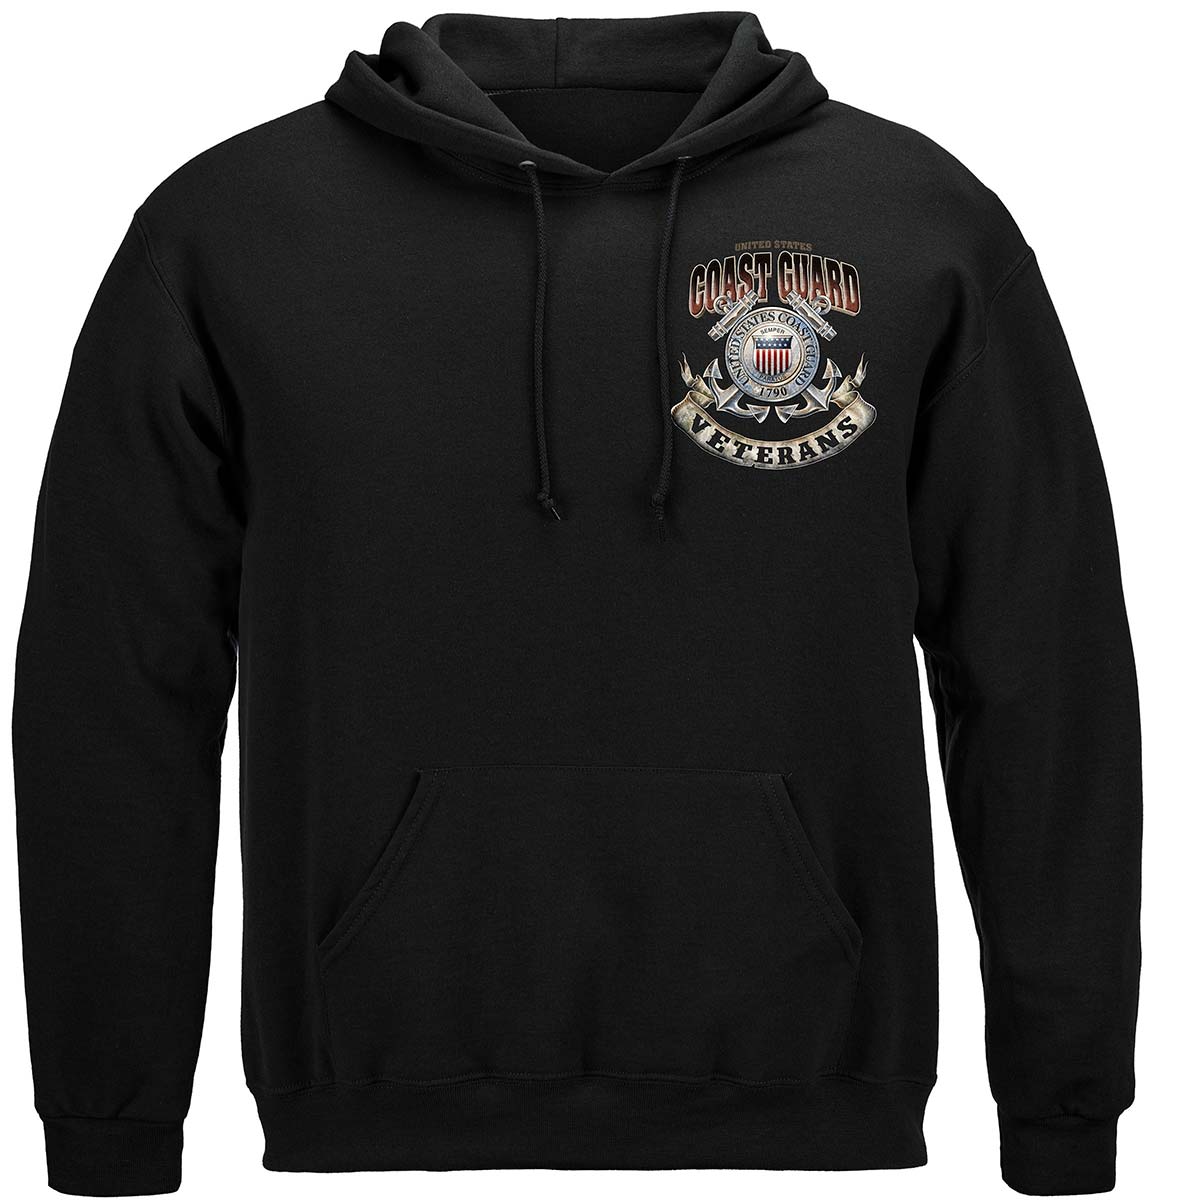 Coast Guard Proud To Have Served Premium Long Sleeves